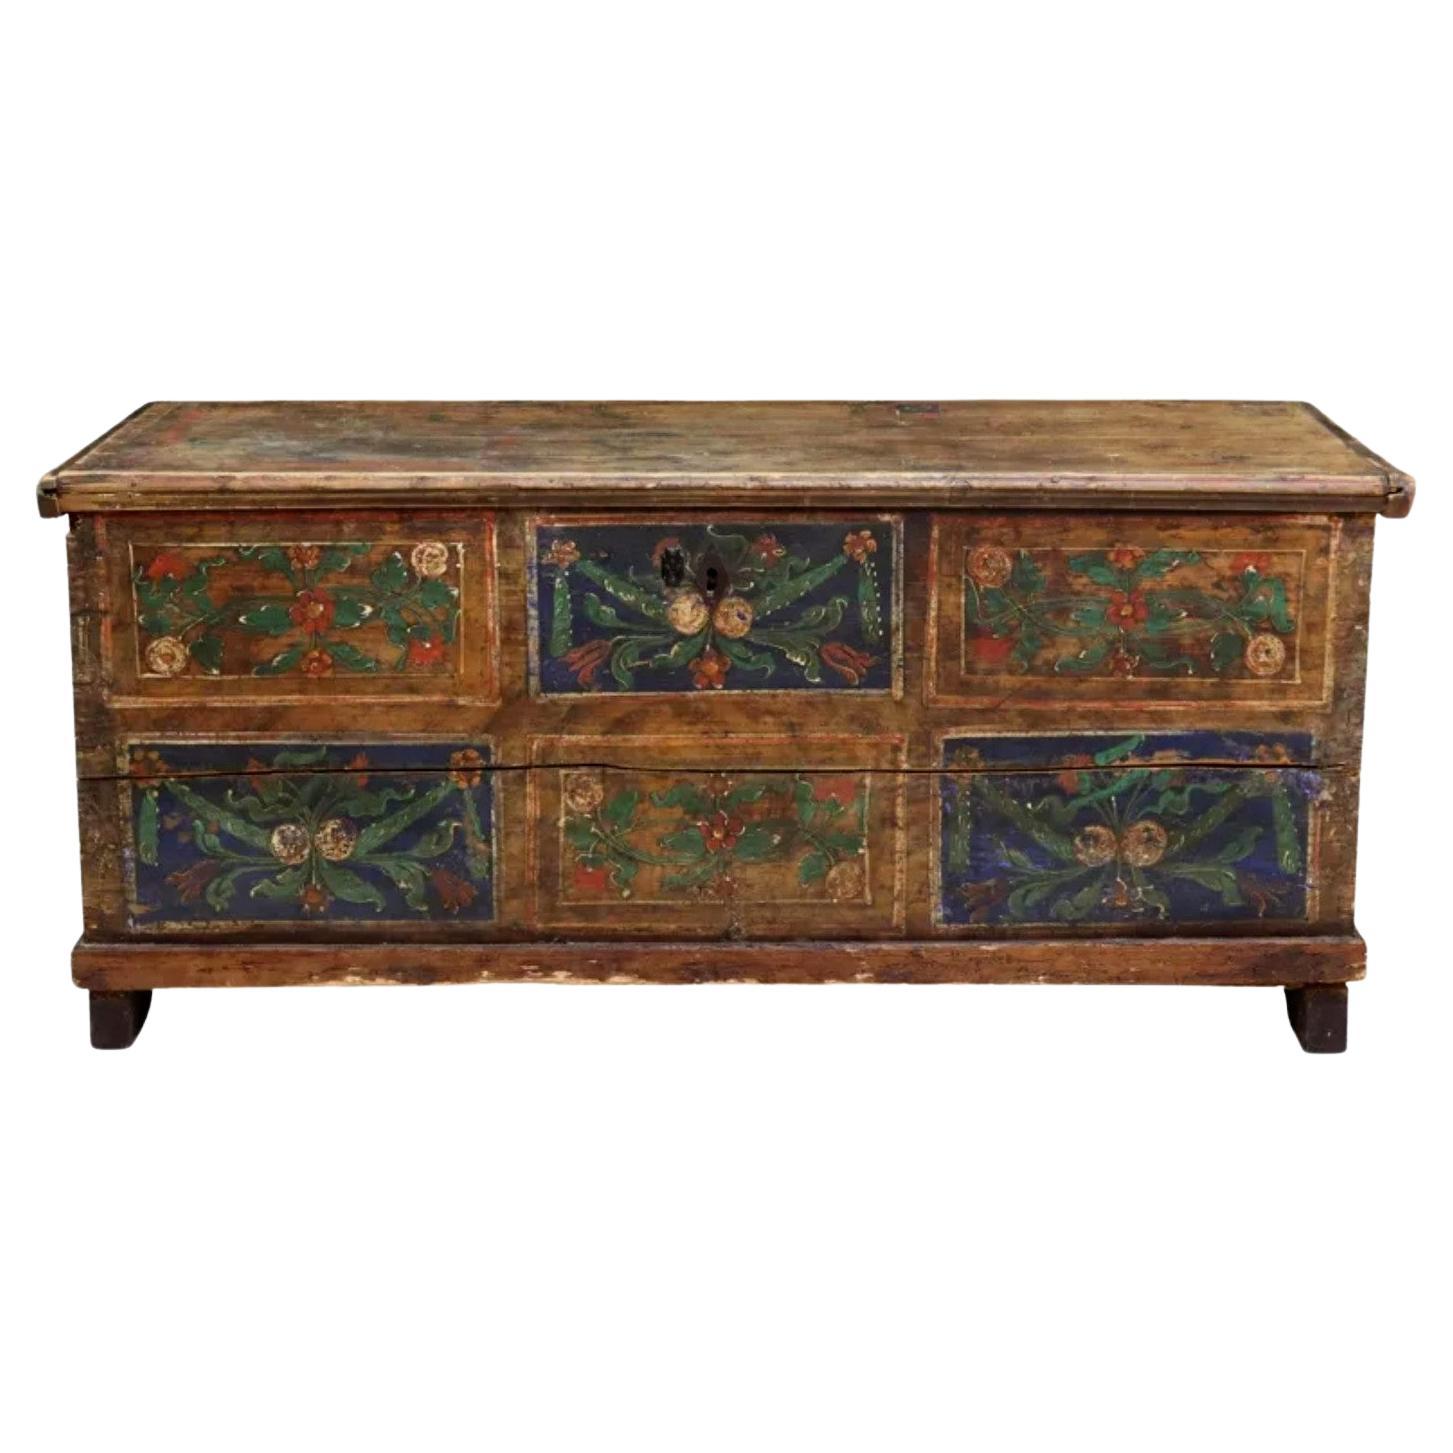 Early 19th Century Scandinavian Hand-Painted Pine Blanket Chest For Sale